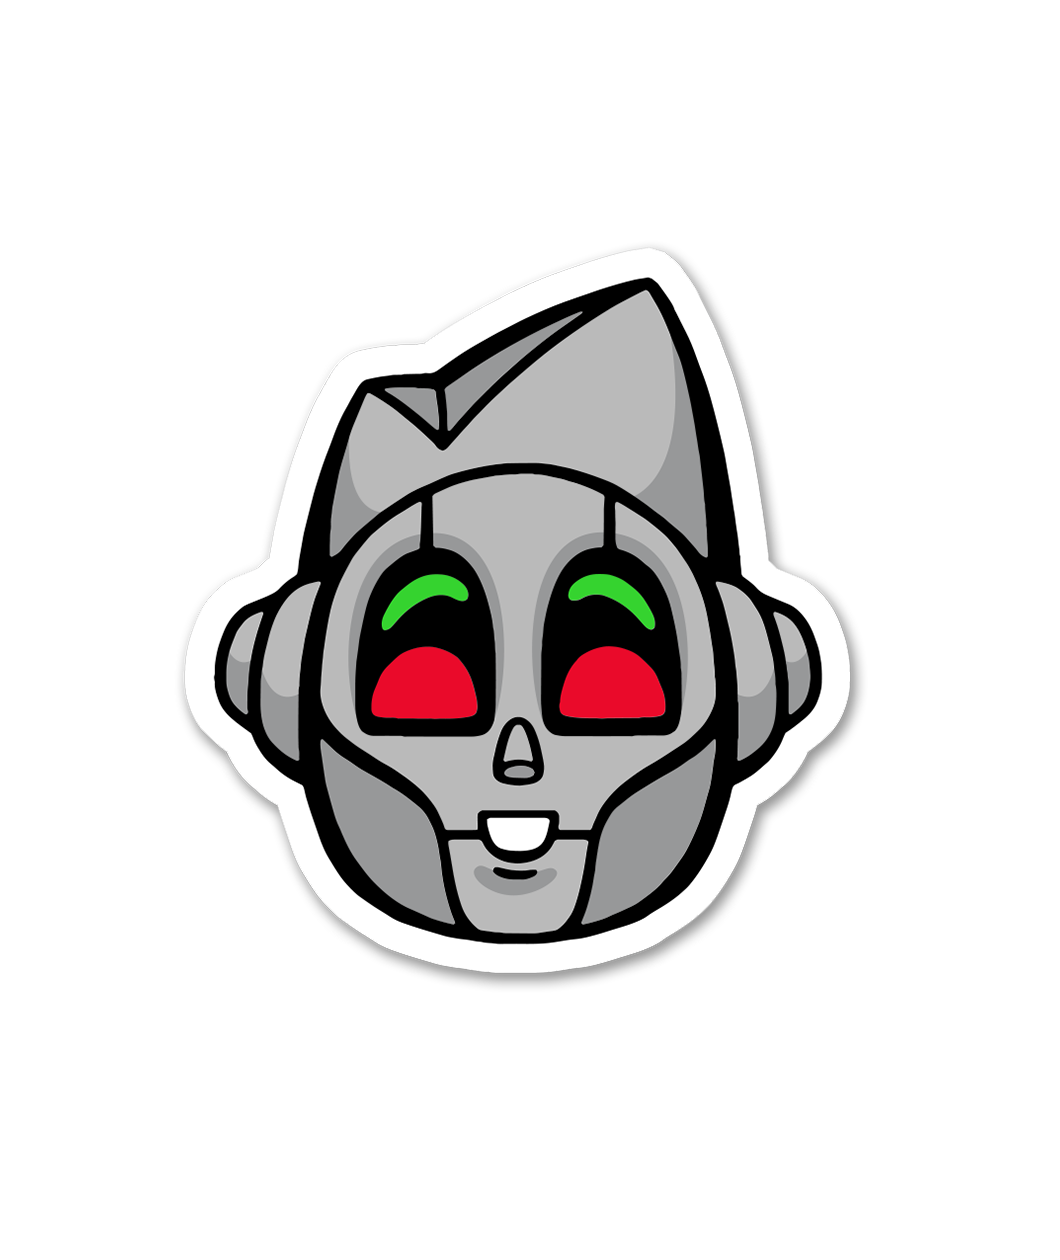 Sticker of a grey robot smiling with red and green eyes.